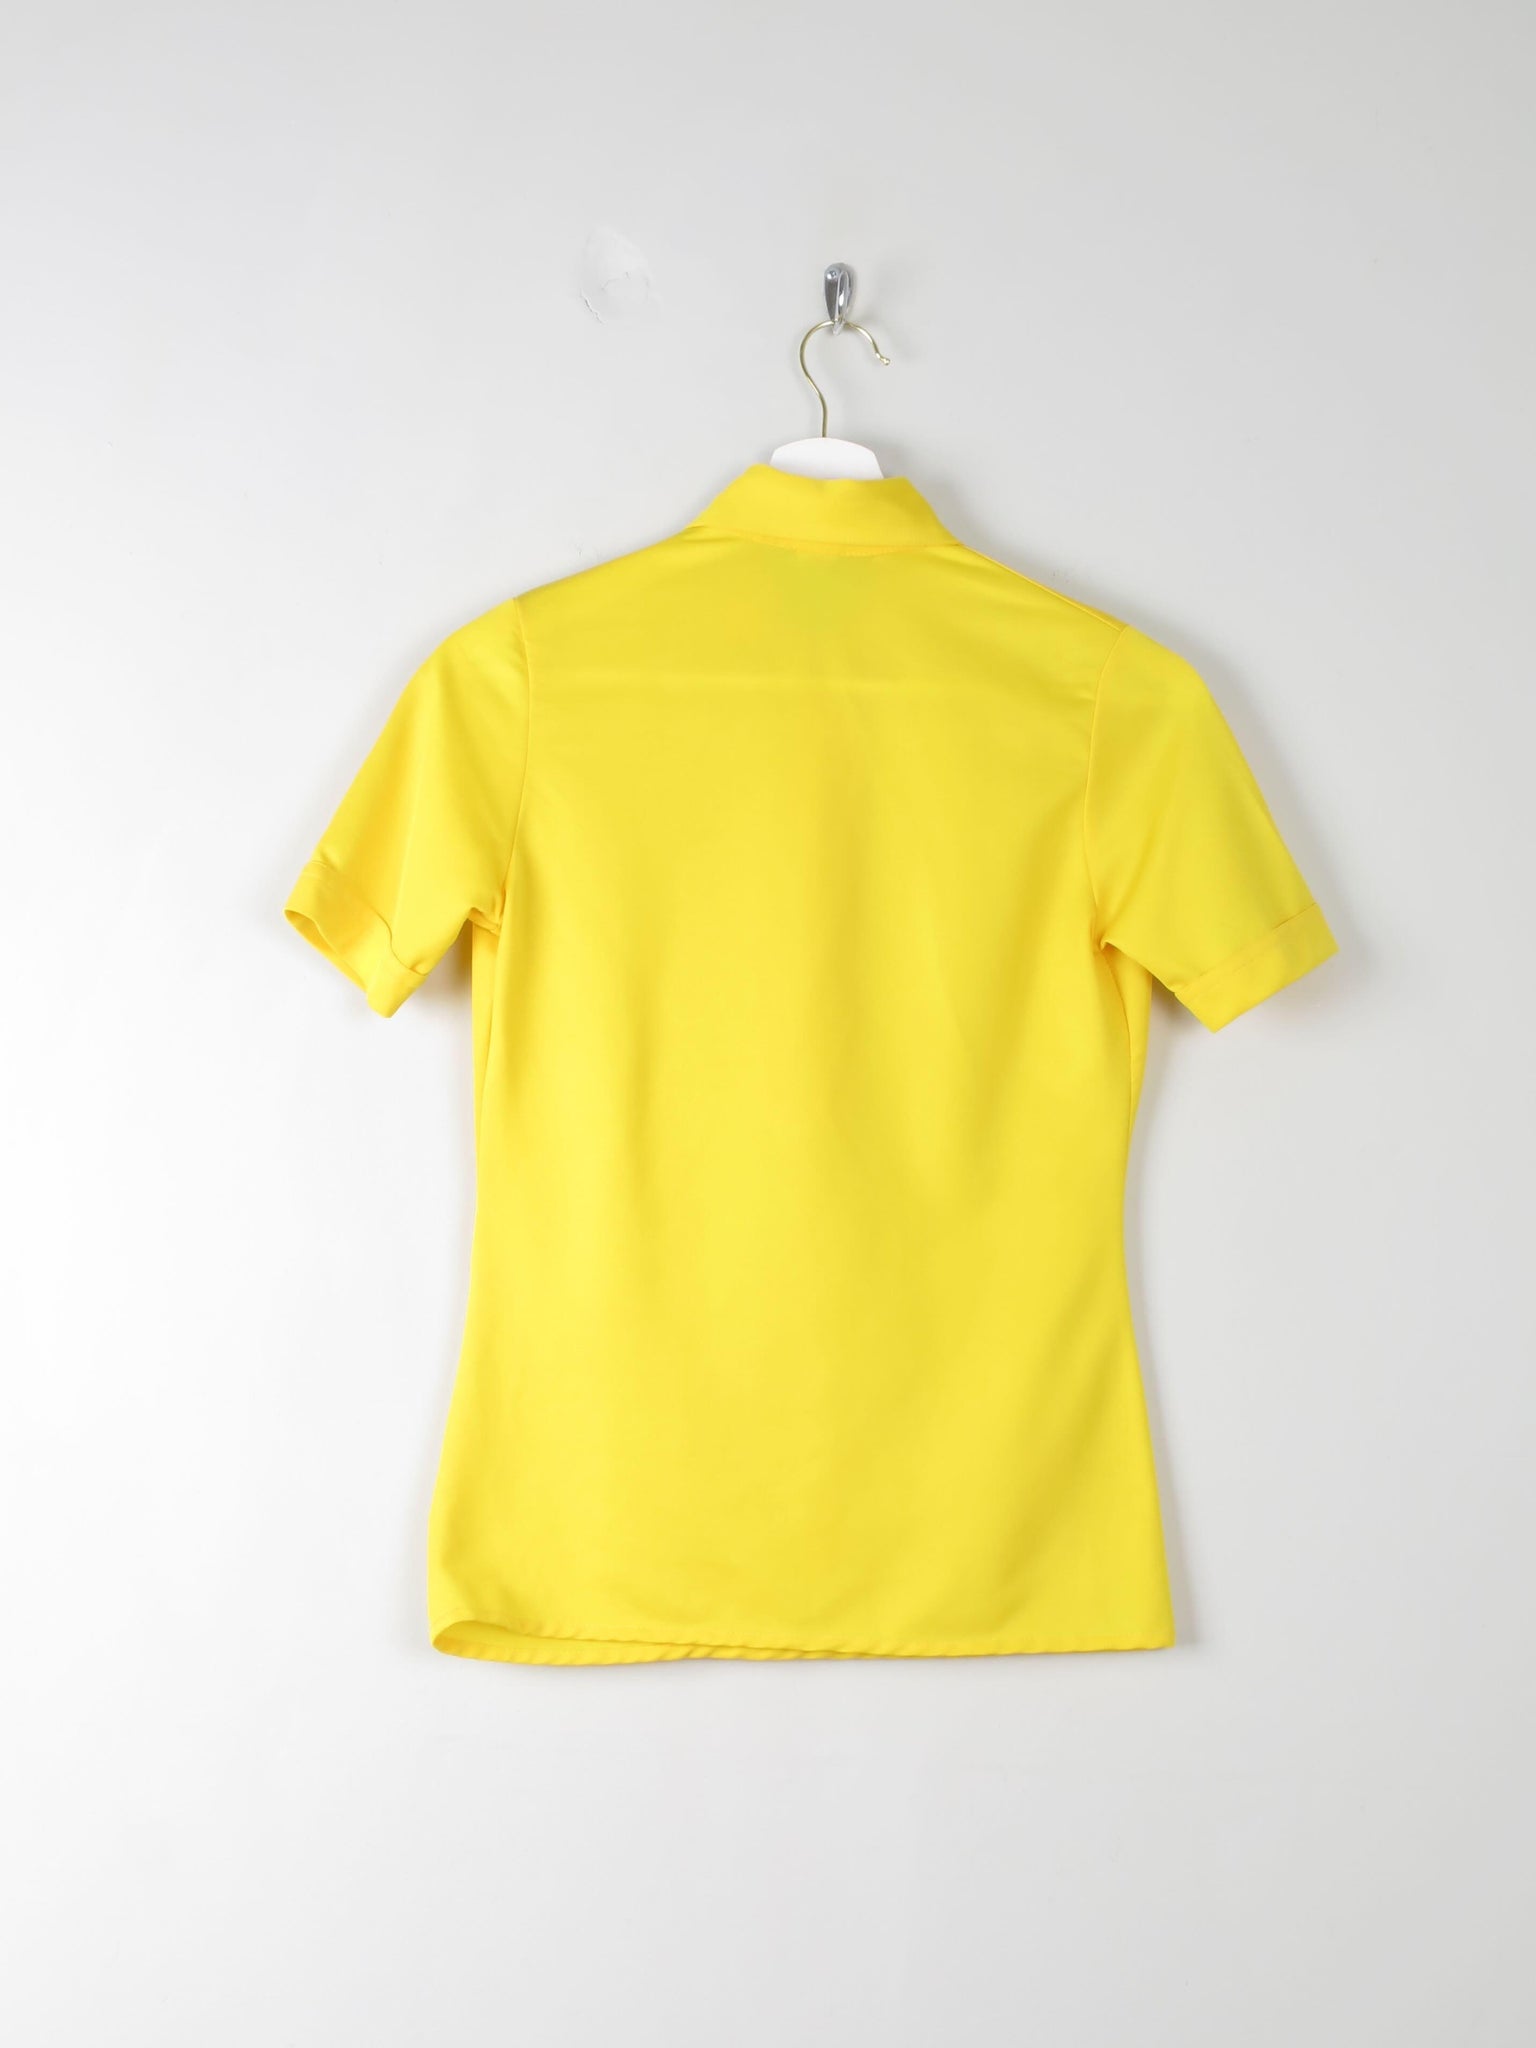 1970s Vintage Yellow Top With a Collar XS - The Harlequin